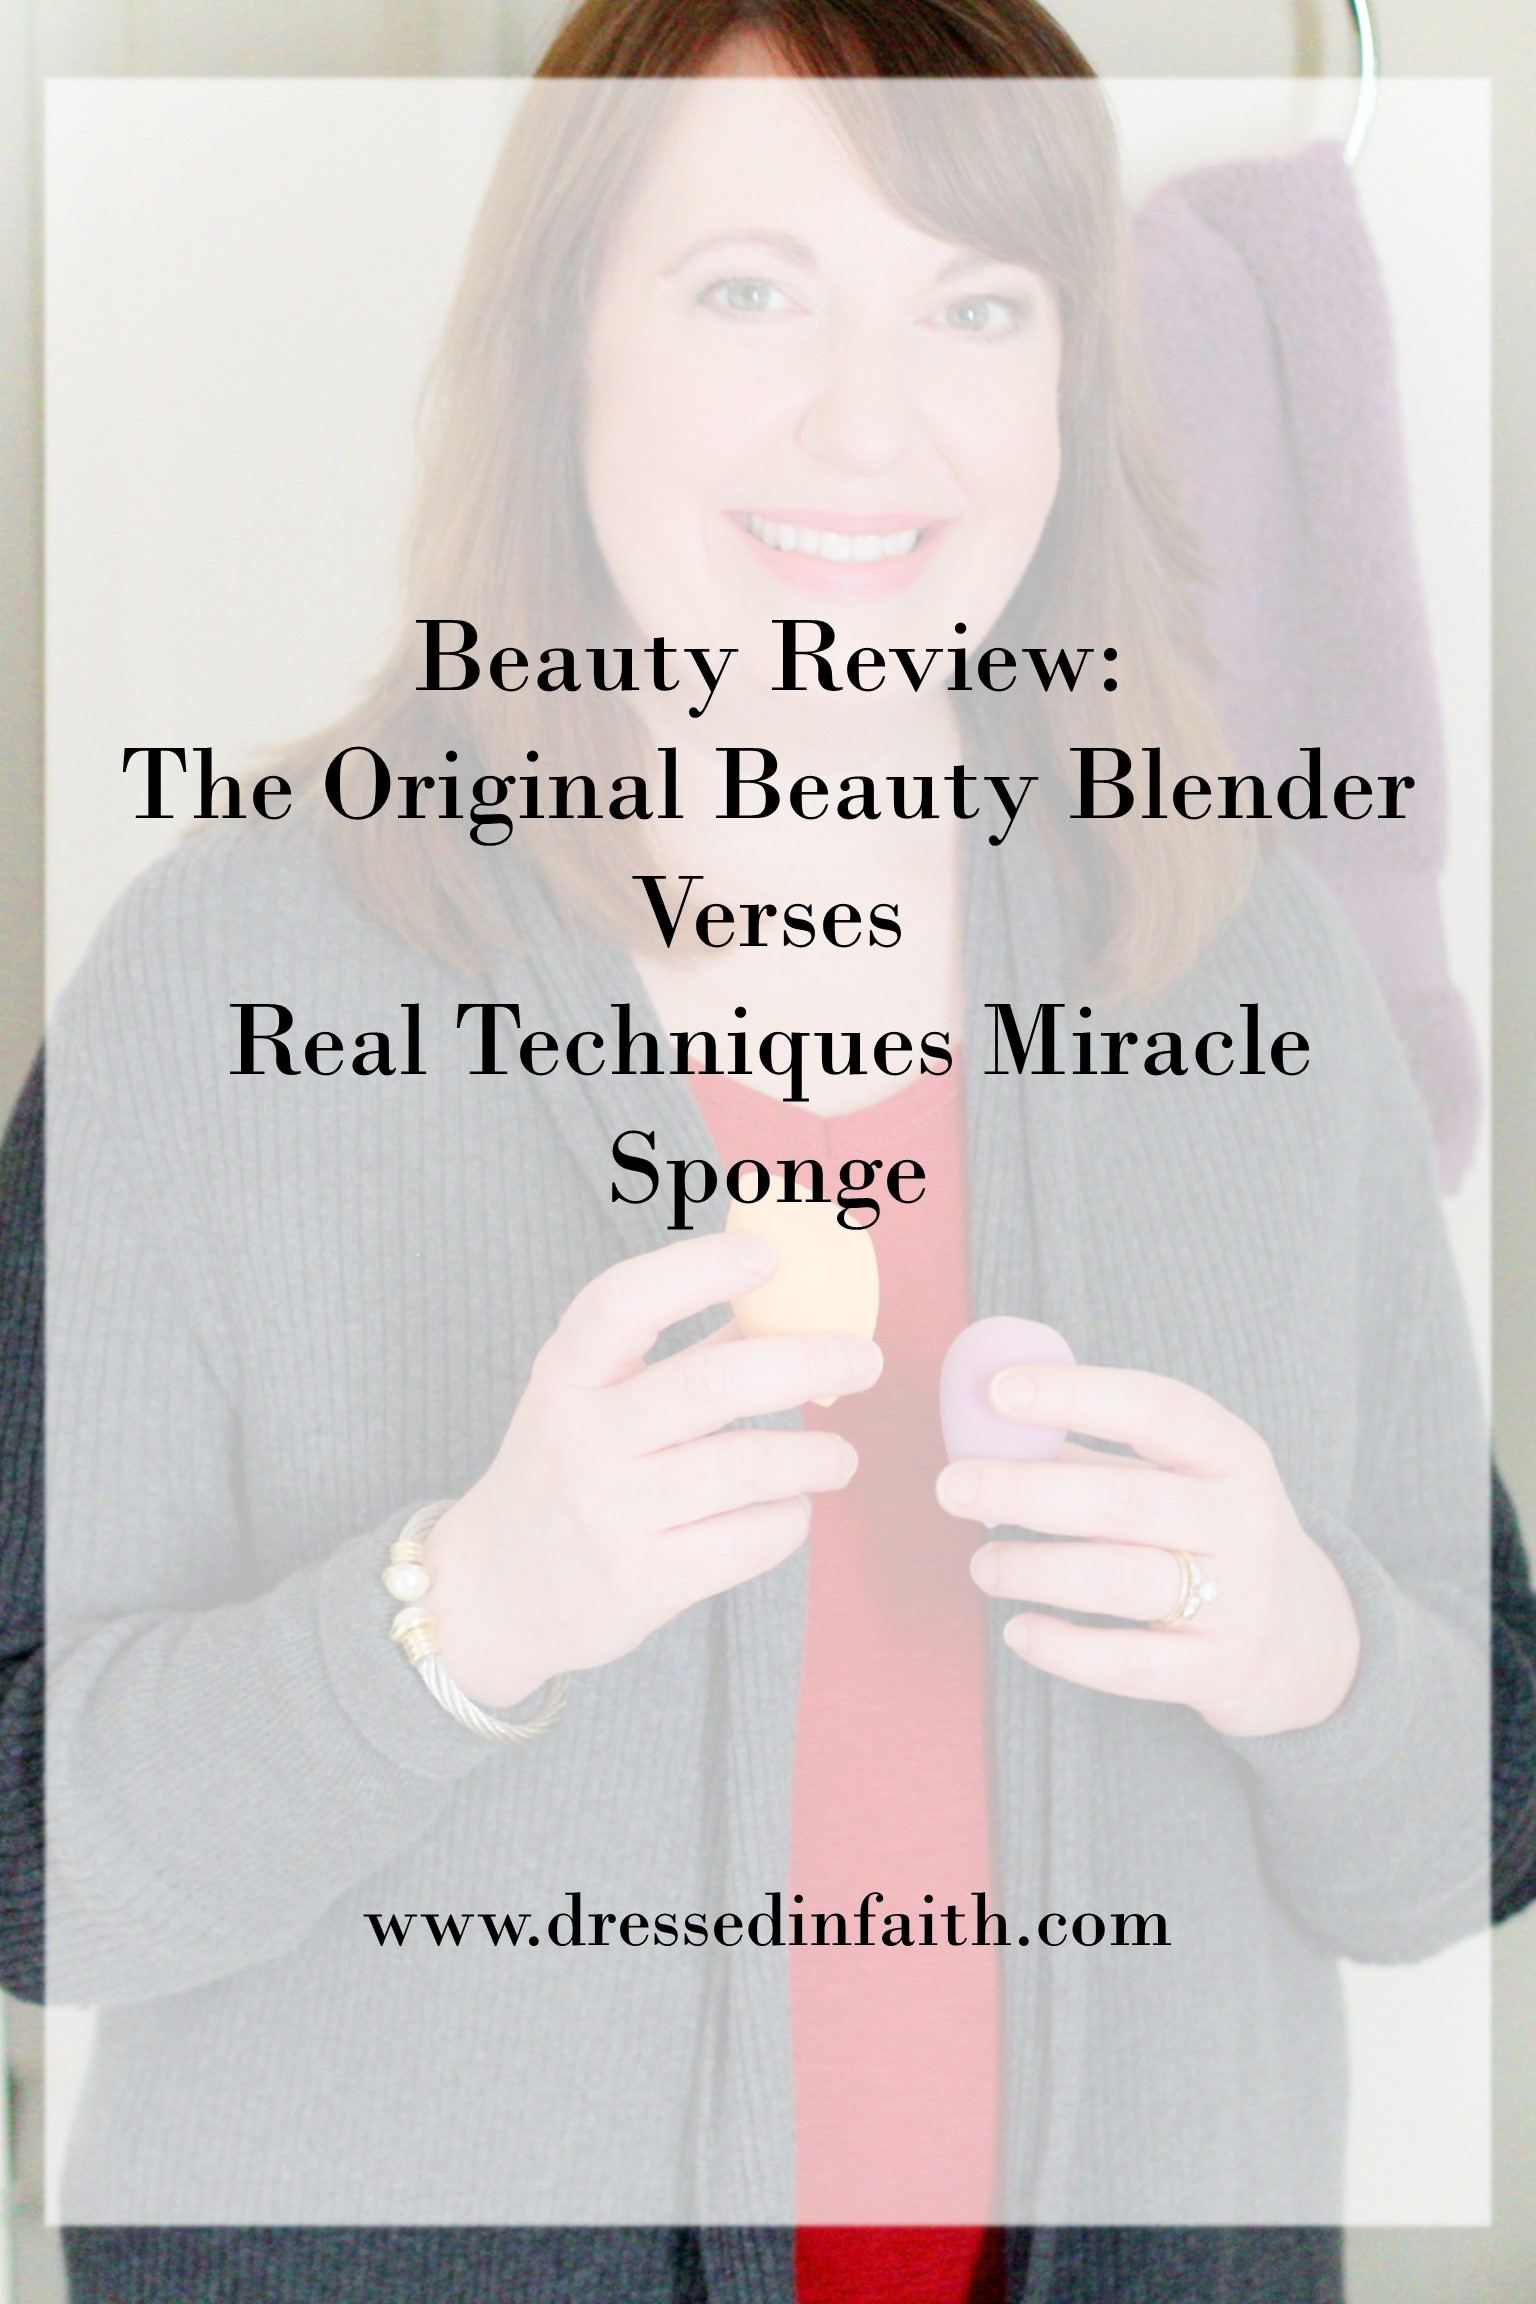 I'm reviewing two popular makeup application sponges to see which one gives better results.  #beautymakeup #beautytips #beautysponge #beautyspongecleaning #makeuptips #makeupproducts